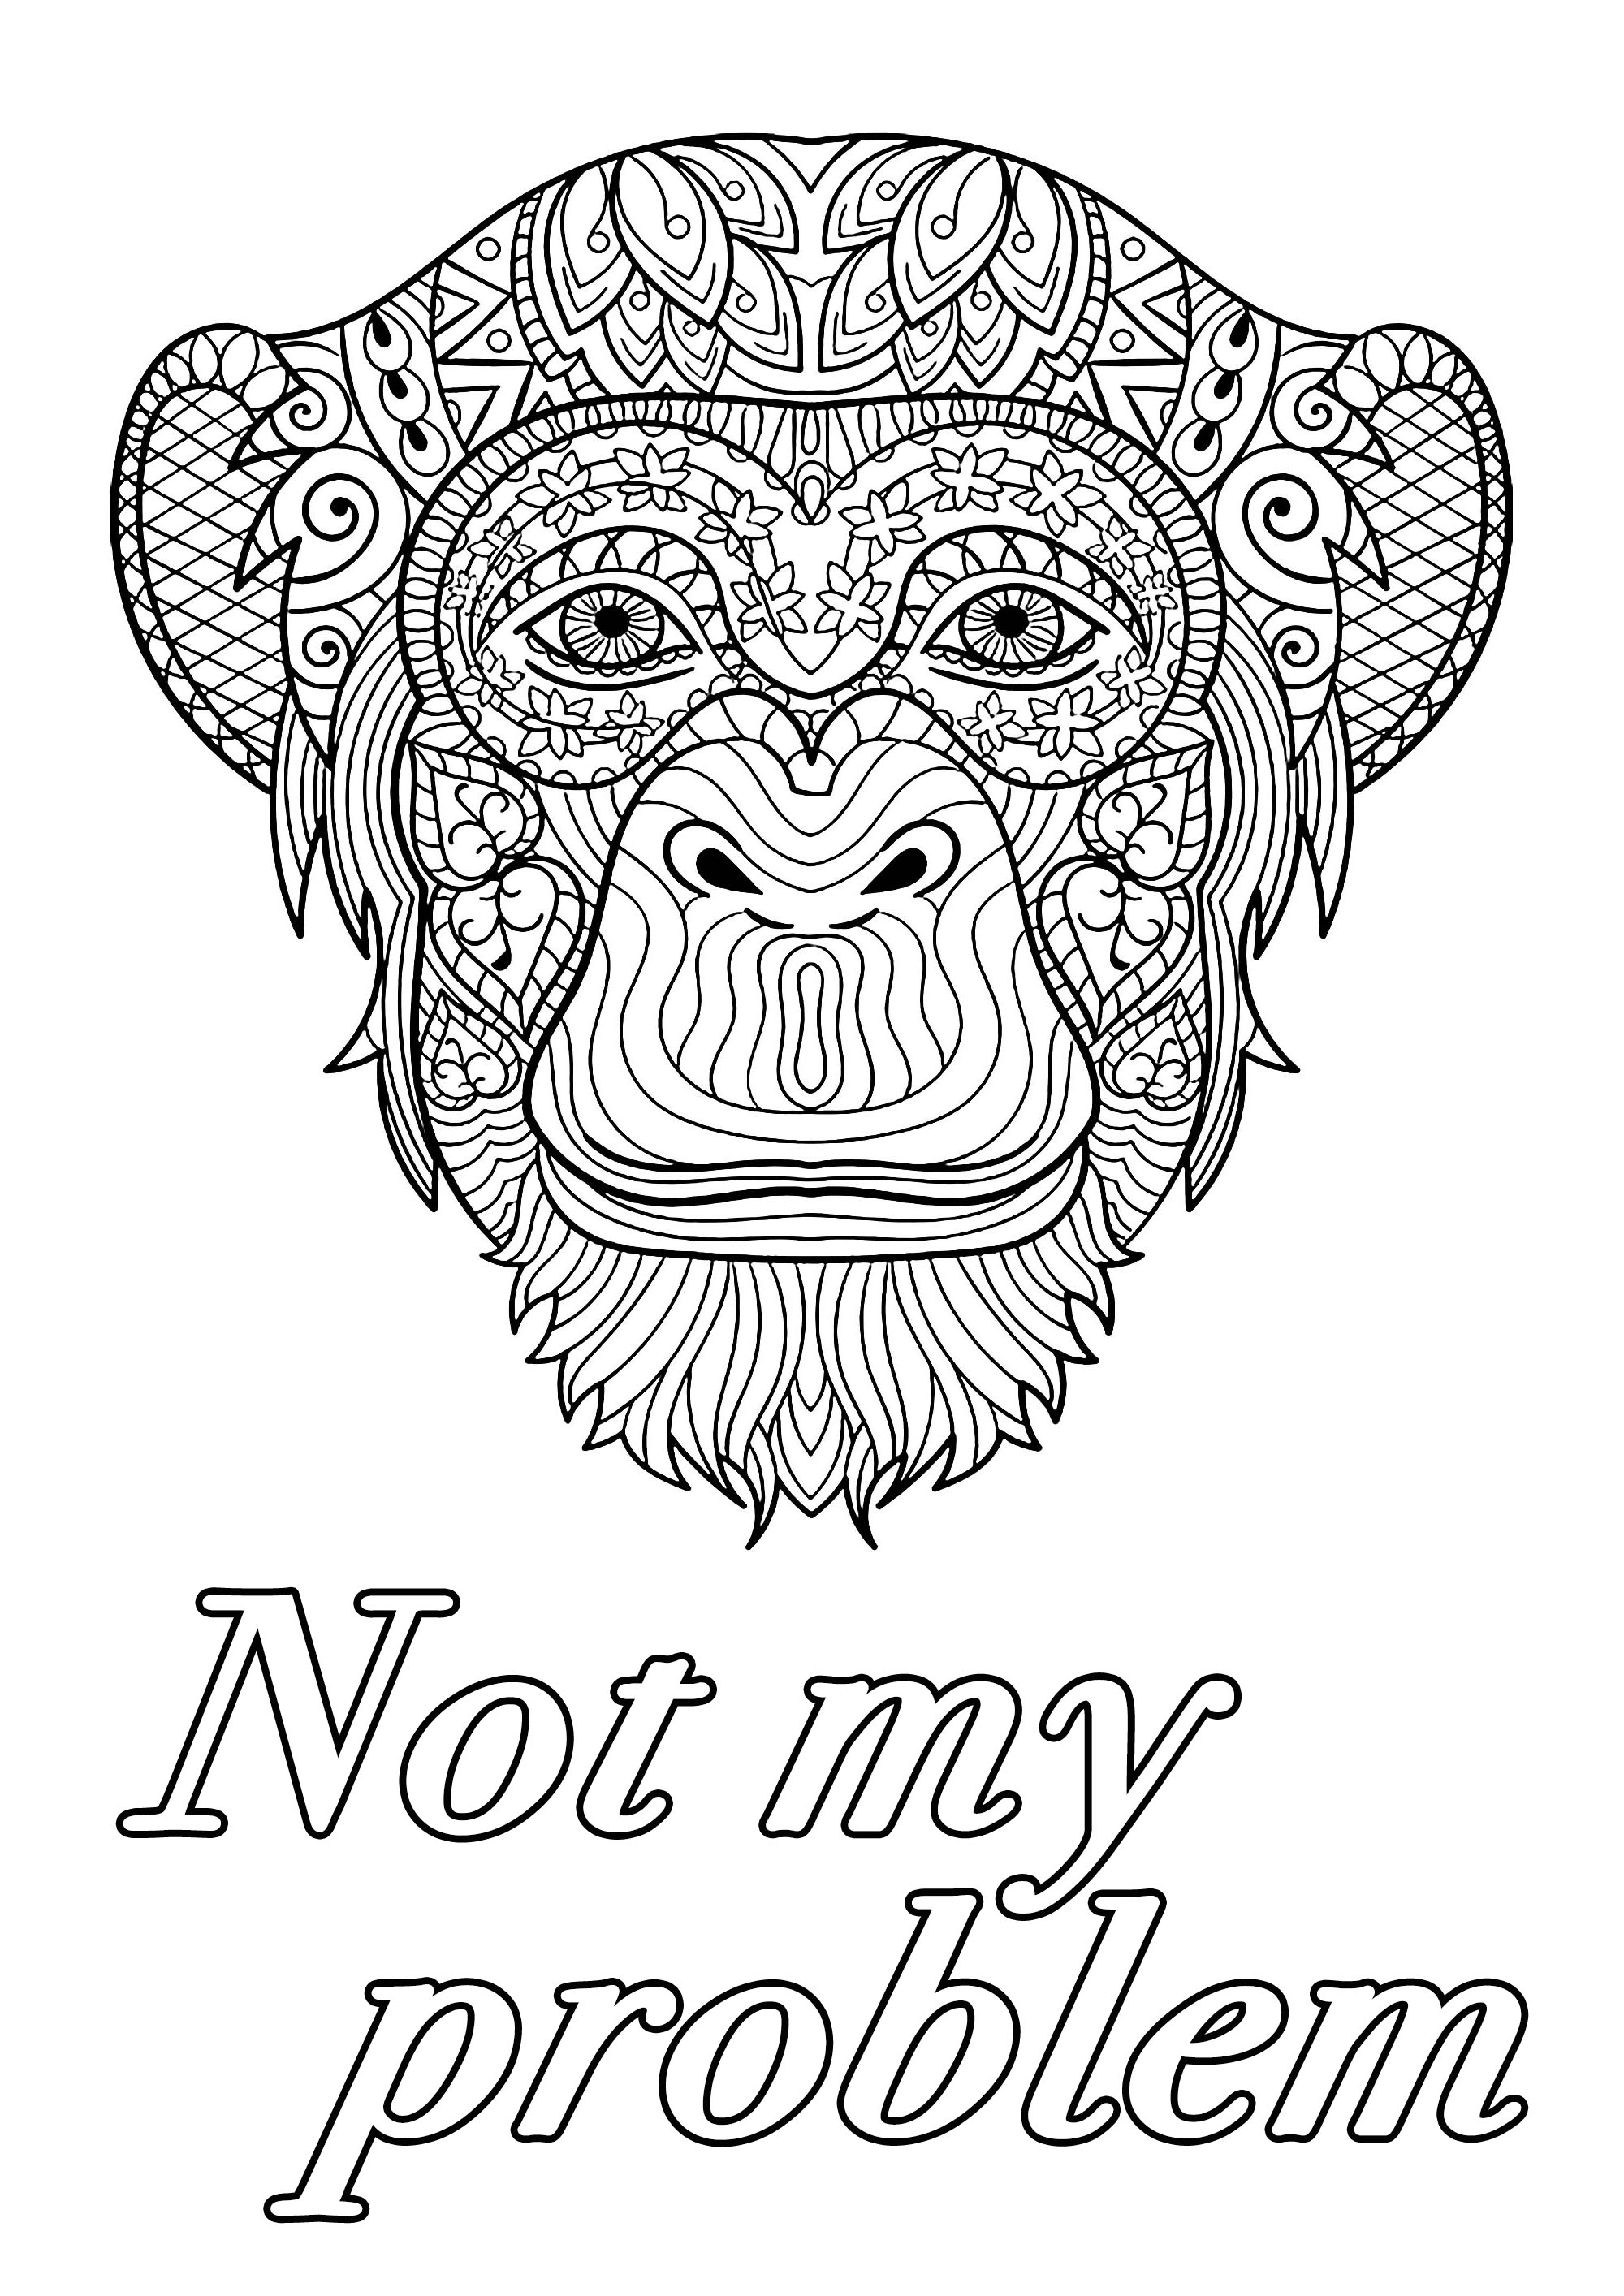 cuss word adult coloring pages